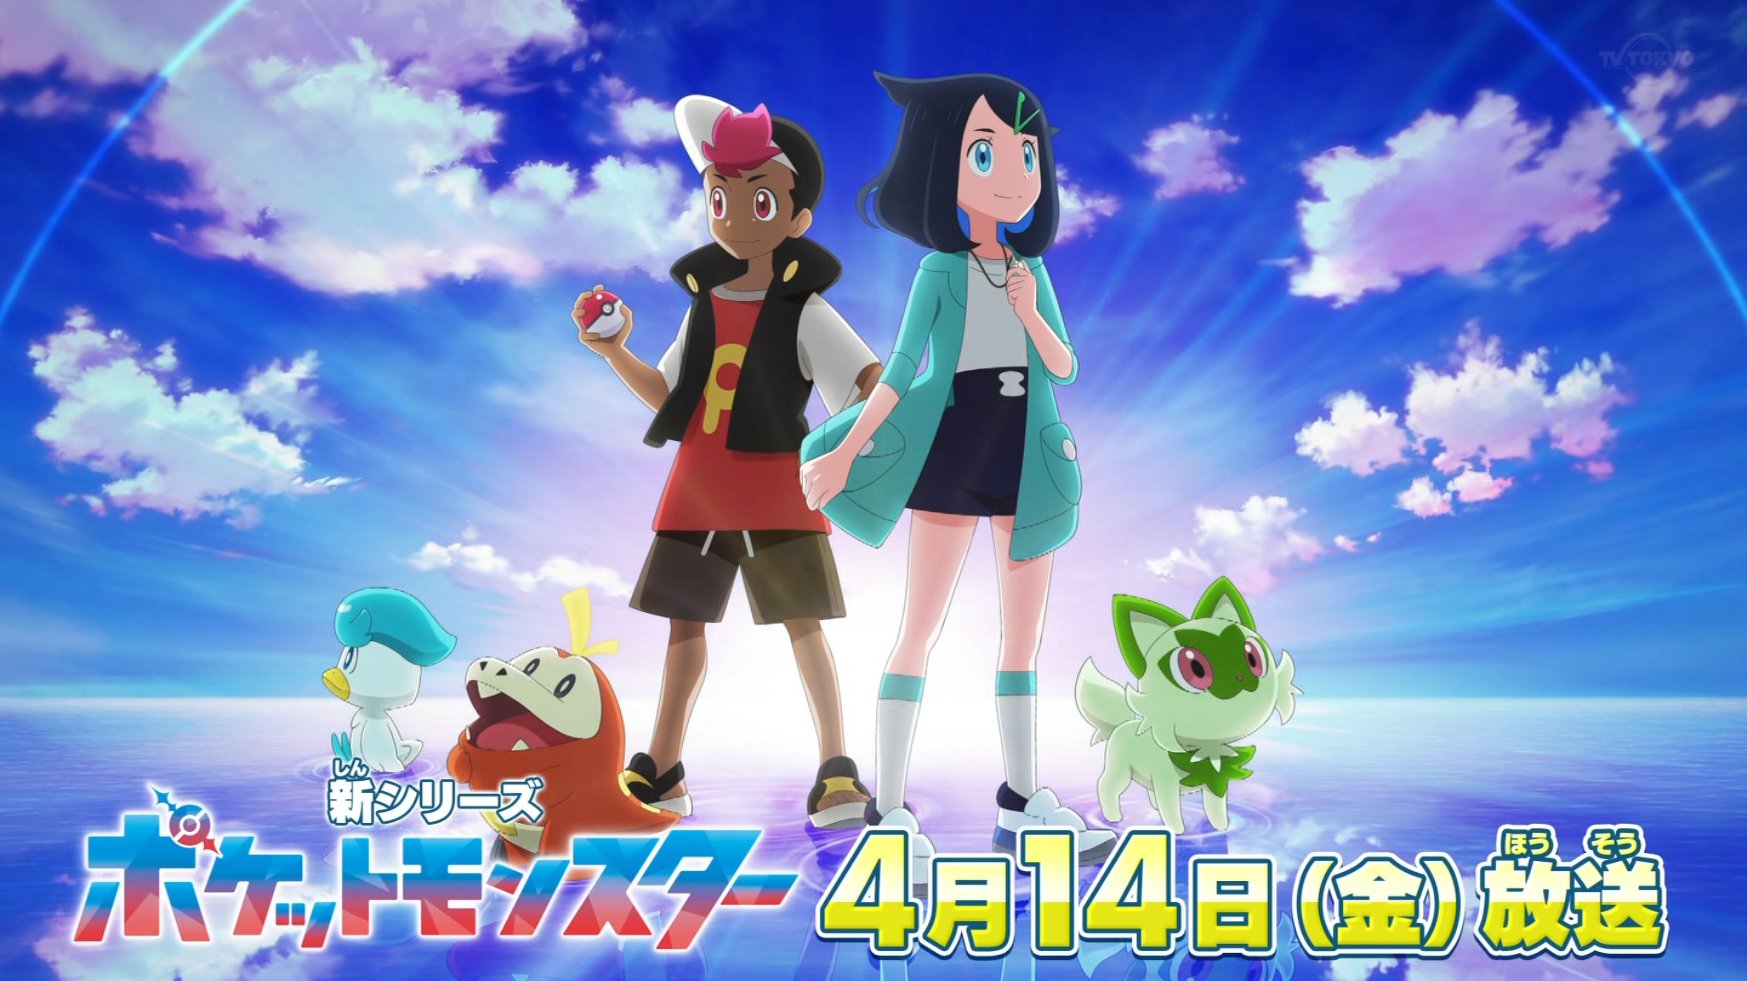 New Pokémon anime series announces the title and opening theme in latest  promo video